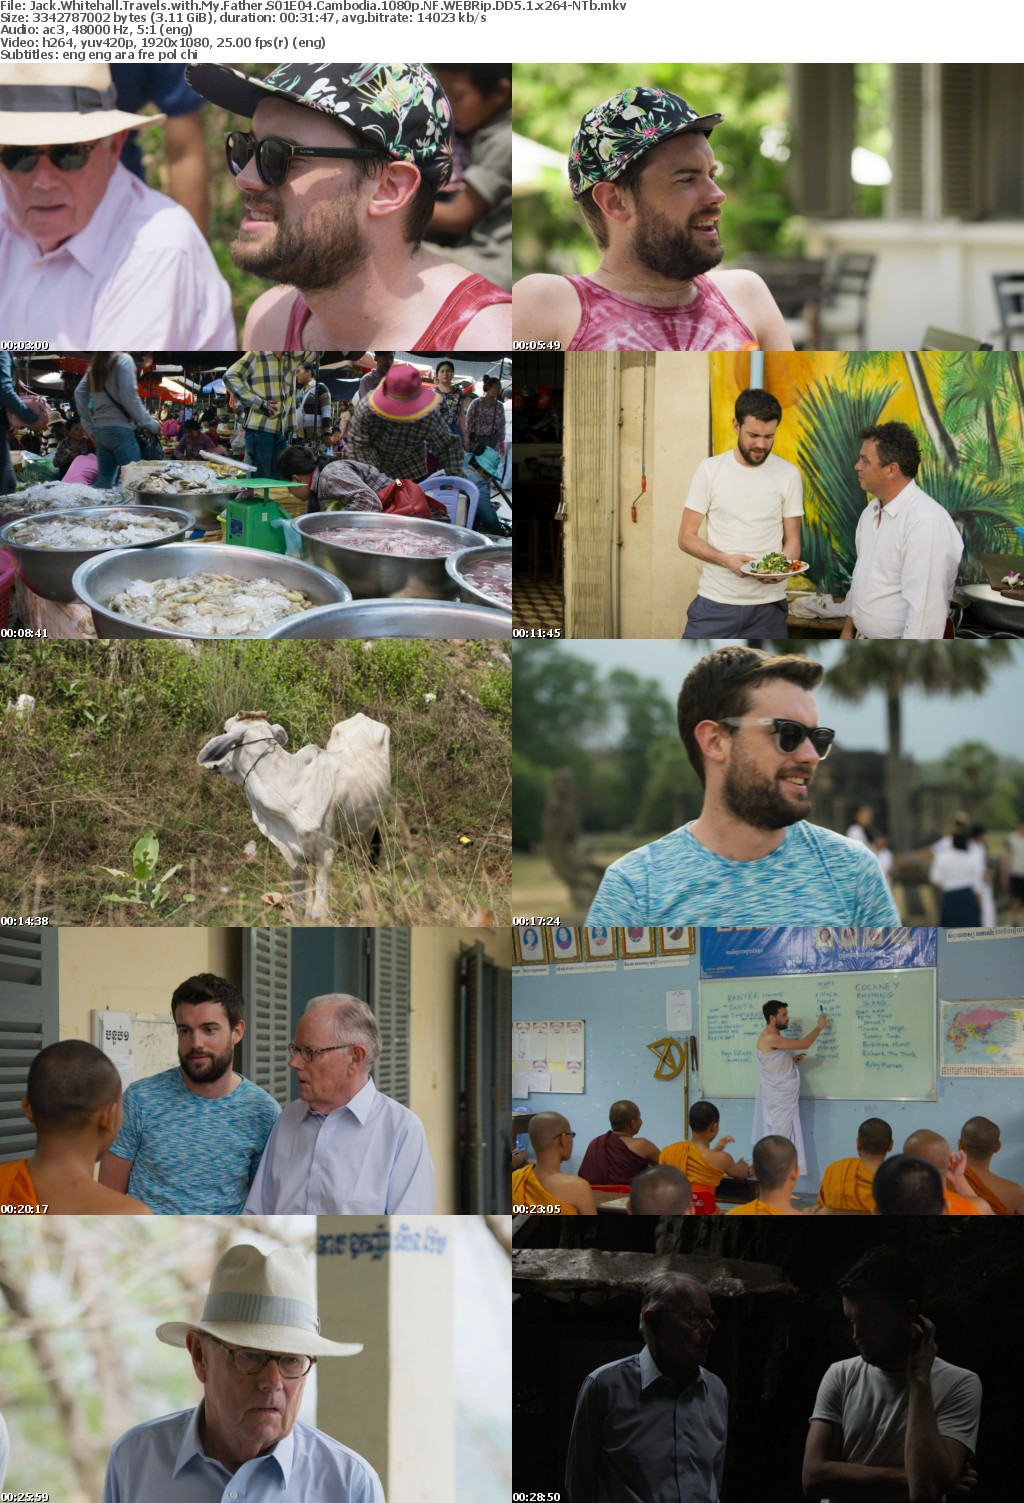 Jack Whitehall Travels with My Father S01E04 Cambodia 1080p NF WEBRip DD5 1 x264-NTb